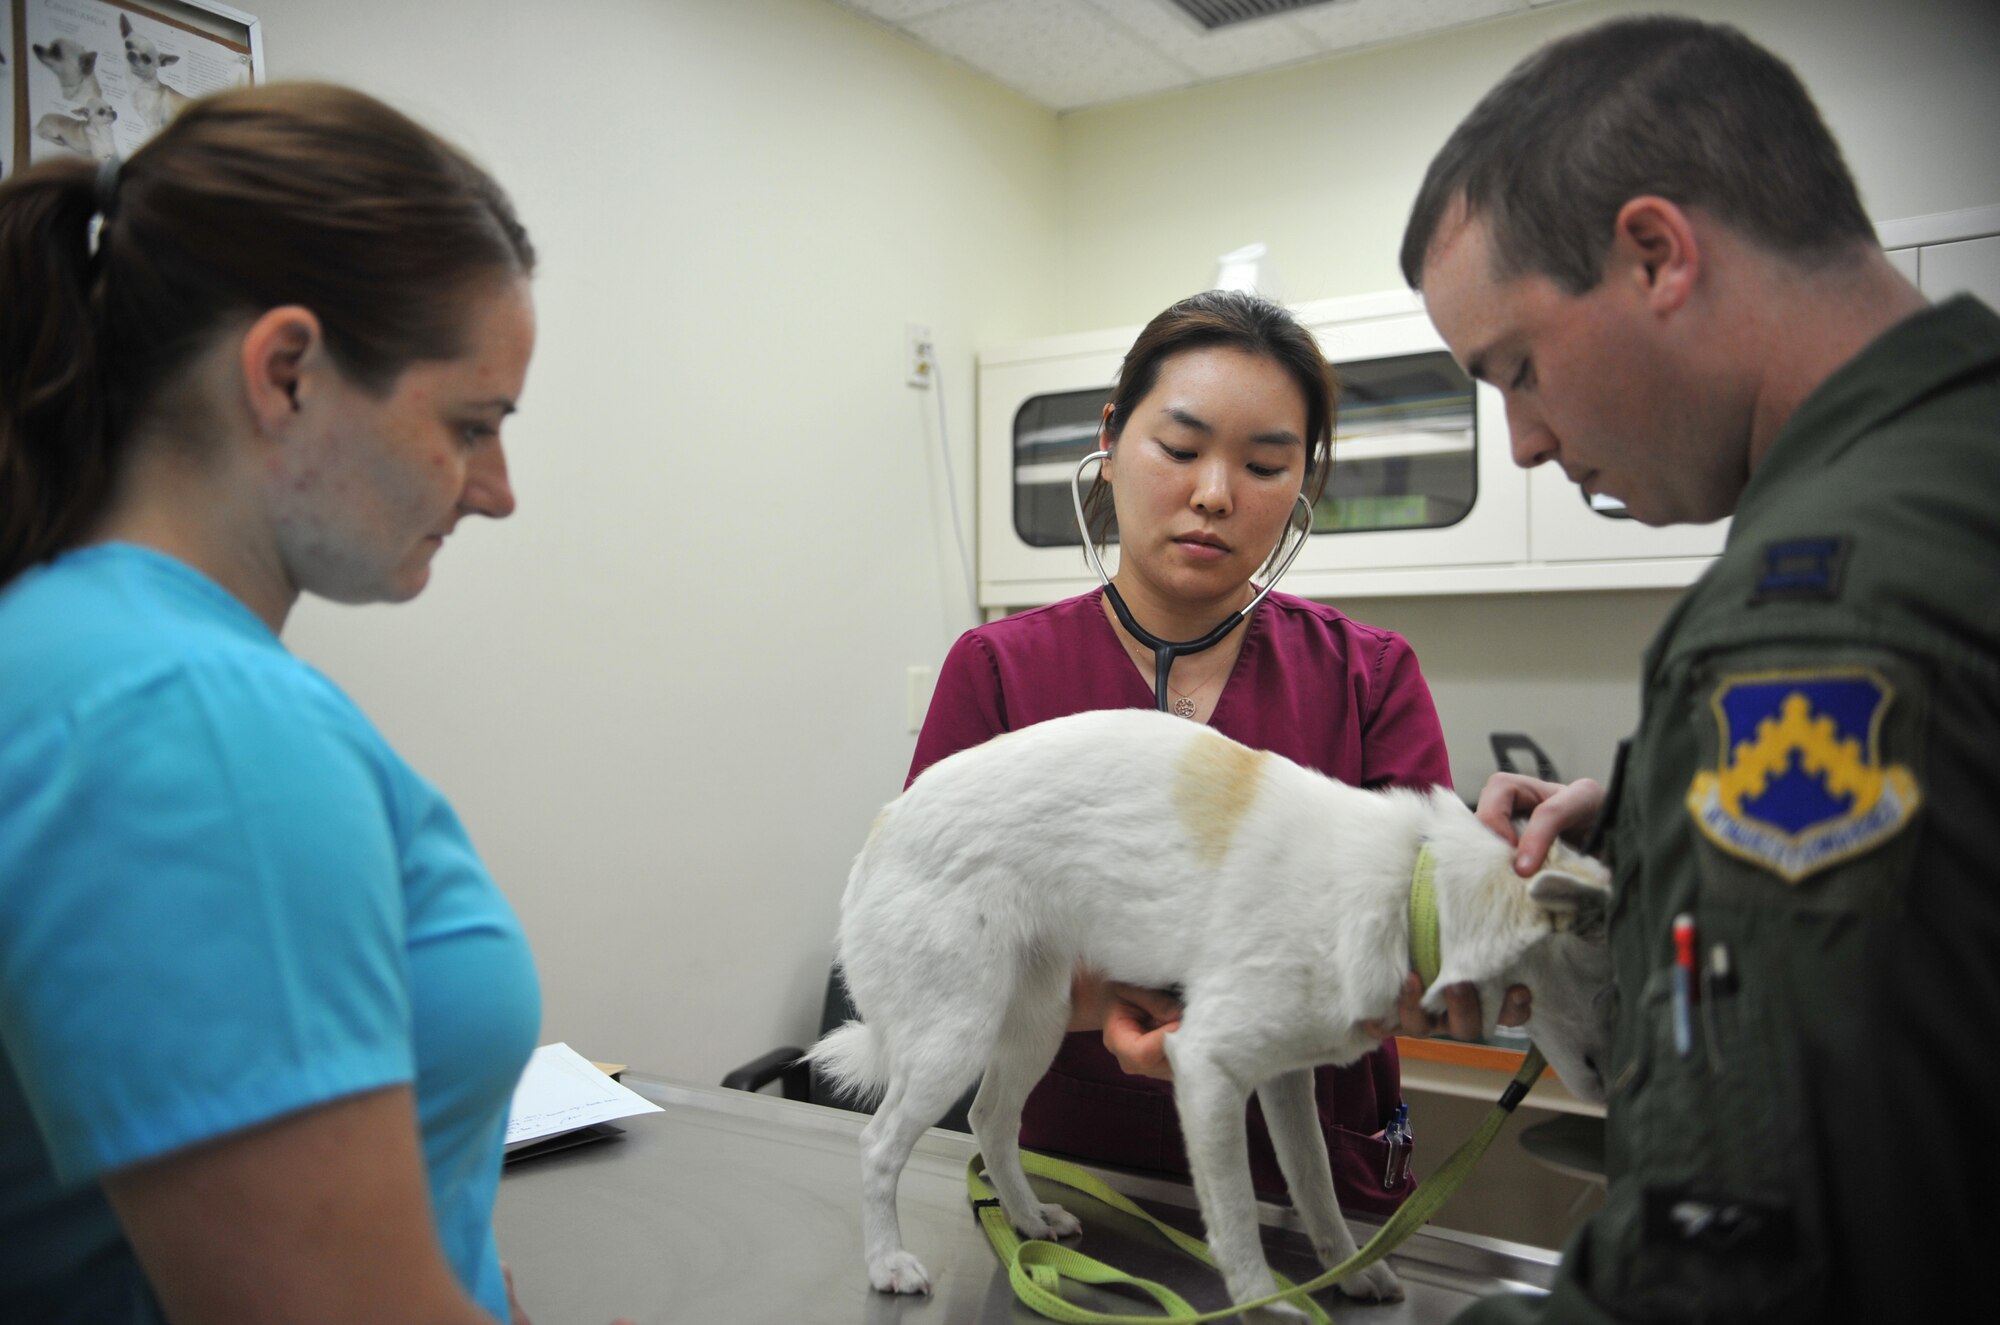 Dr. Kyongmi Kim, 106th Medical Detachment veterinarian, listens to the heartbeat of J.D., a jindo mix, during an outprocessing appointment at the Veterinary Treatment Facility on Osan Air Base, Republic of Korea, June 2, 2014. Capt. Ryan Mendenhall, 80th Fighter Squadron F-16 Fighting Falcon pilot, brought J.D. in for a microchip and a rabies vaccination as part of his permanent change of station from Kunsan AB, ROK, to Spangdahlem AB, Germany. (U.S. Air Force photo/Airman 1st Class Ashley J. Thum)